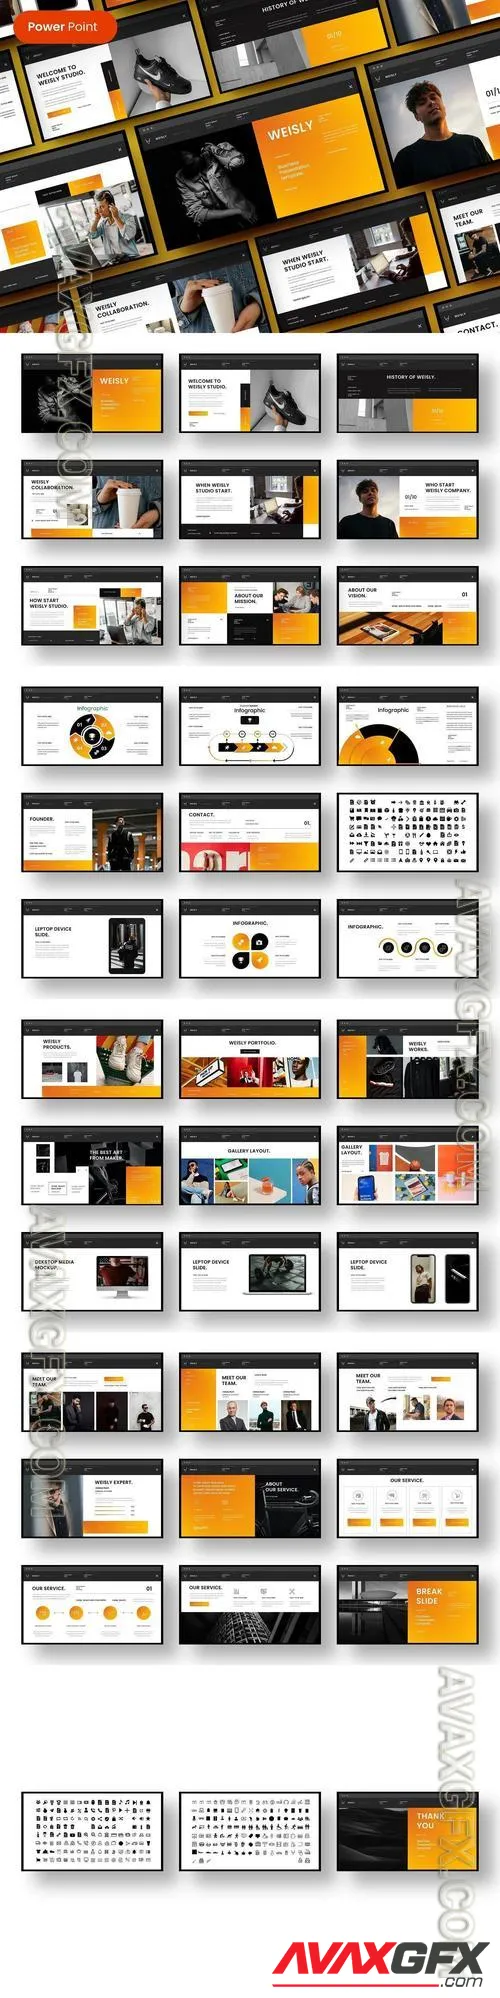 Weisly - Business PowerPoint Template